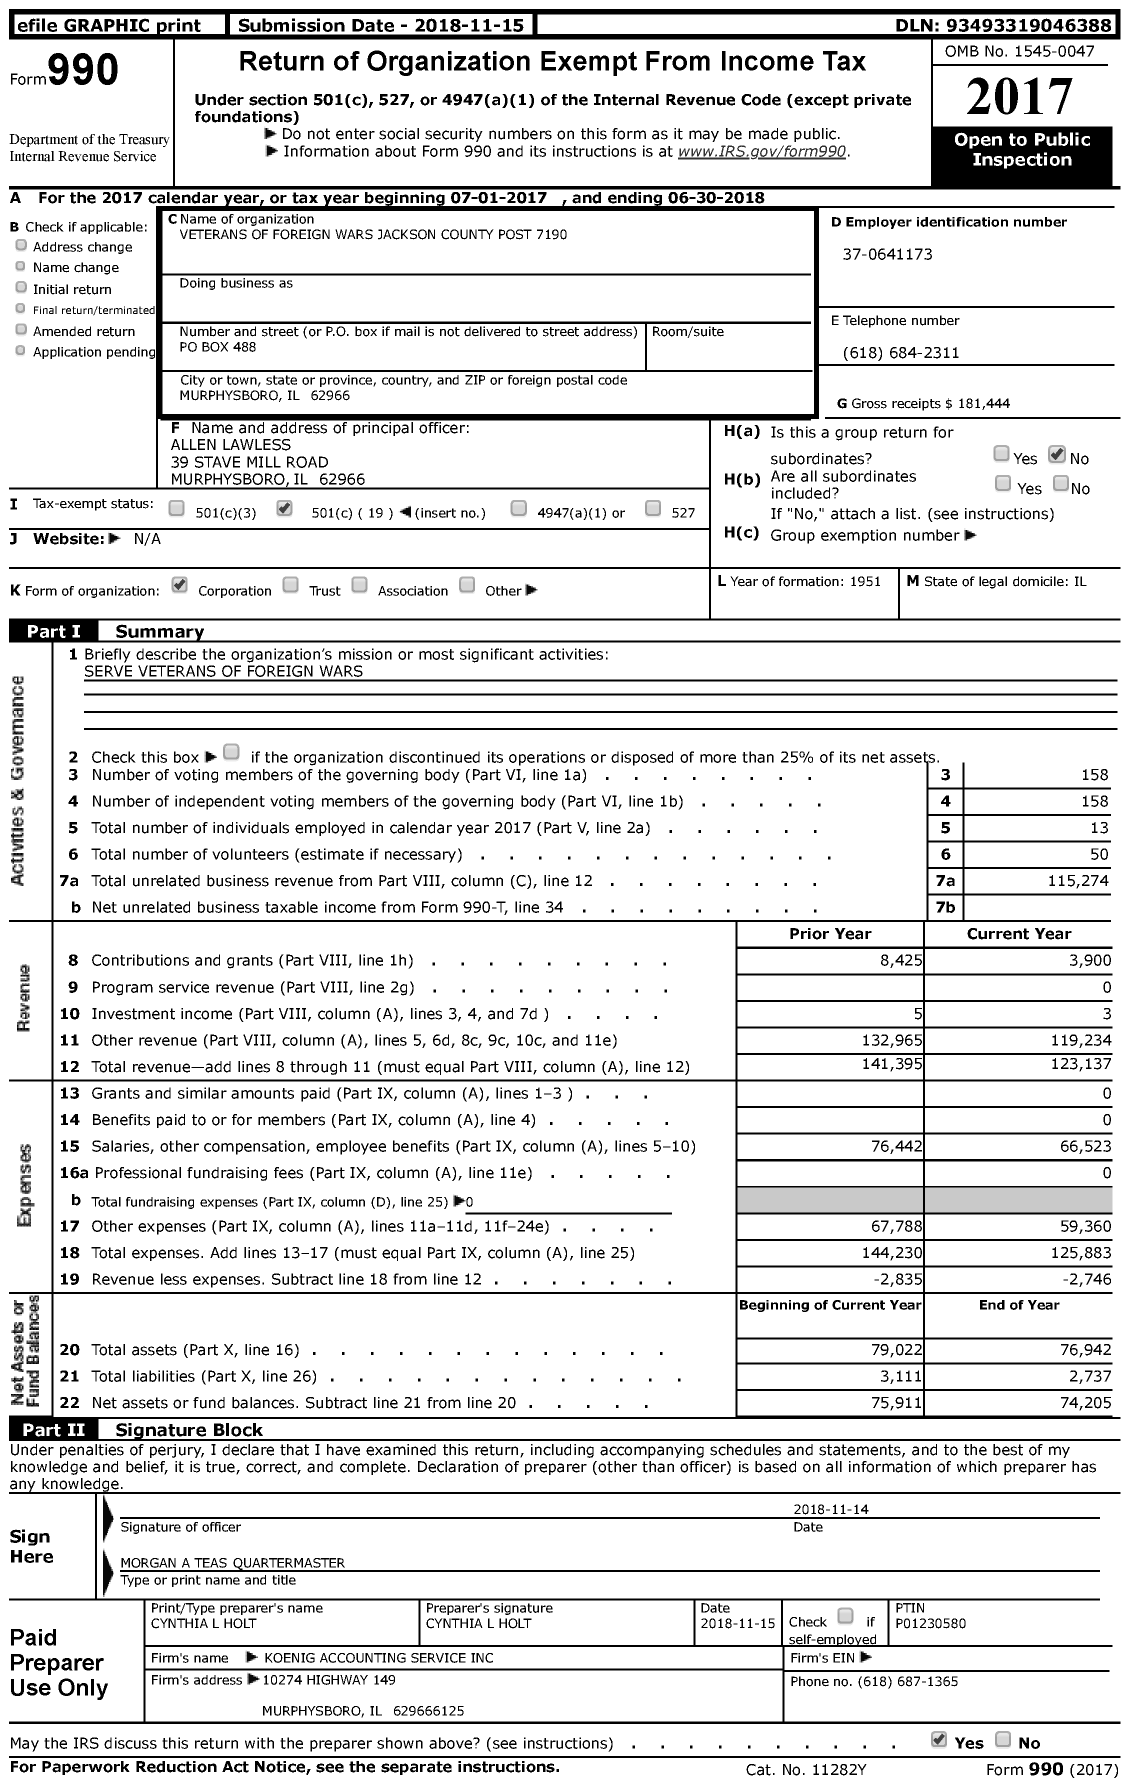 Image of first page of 2017 Form 990 for VFW Dept of Illinois - 7190 Jackson County Post